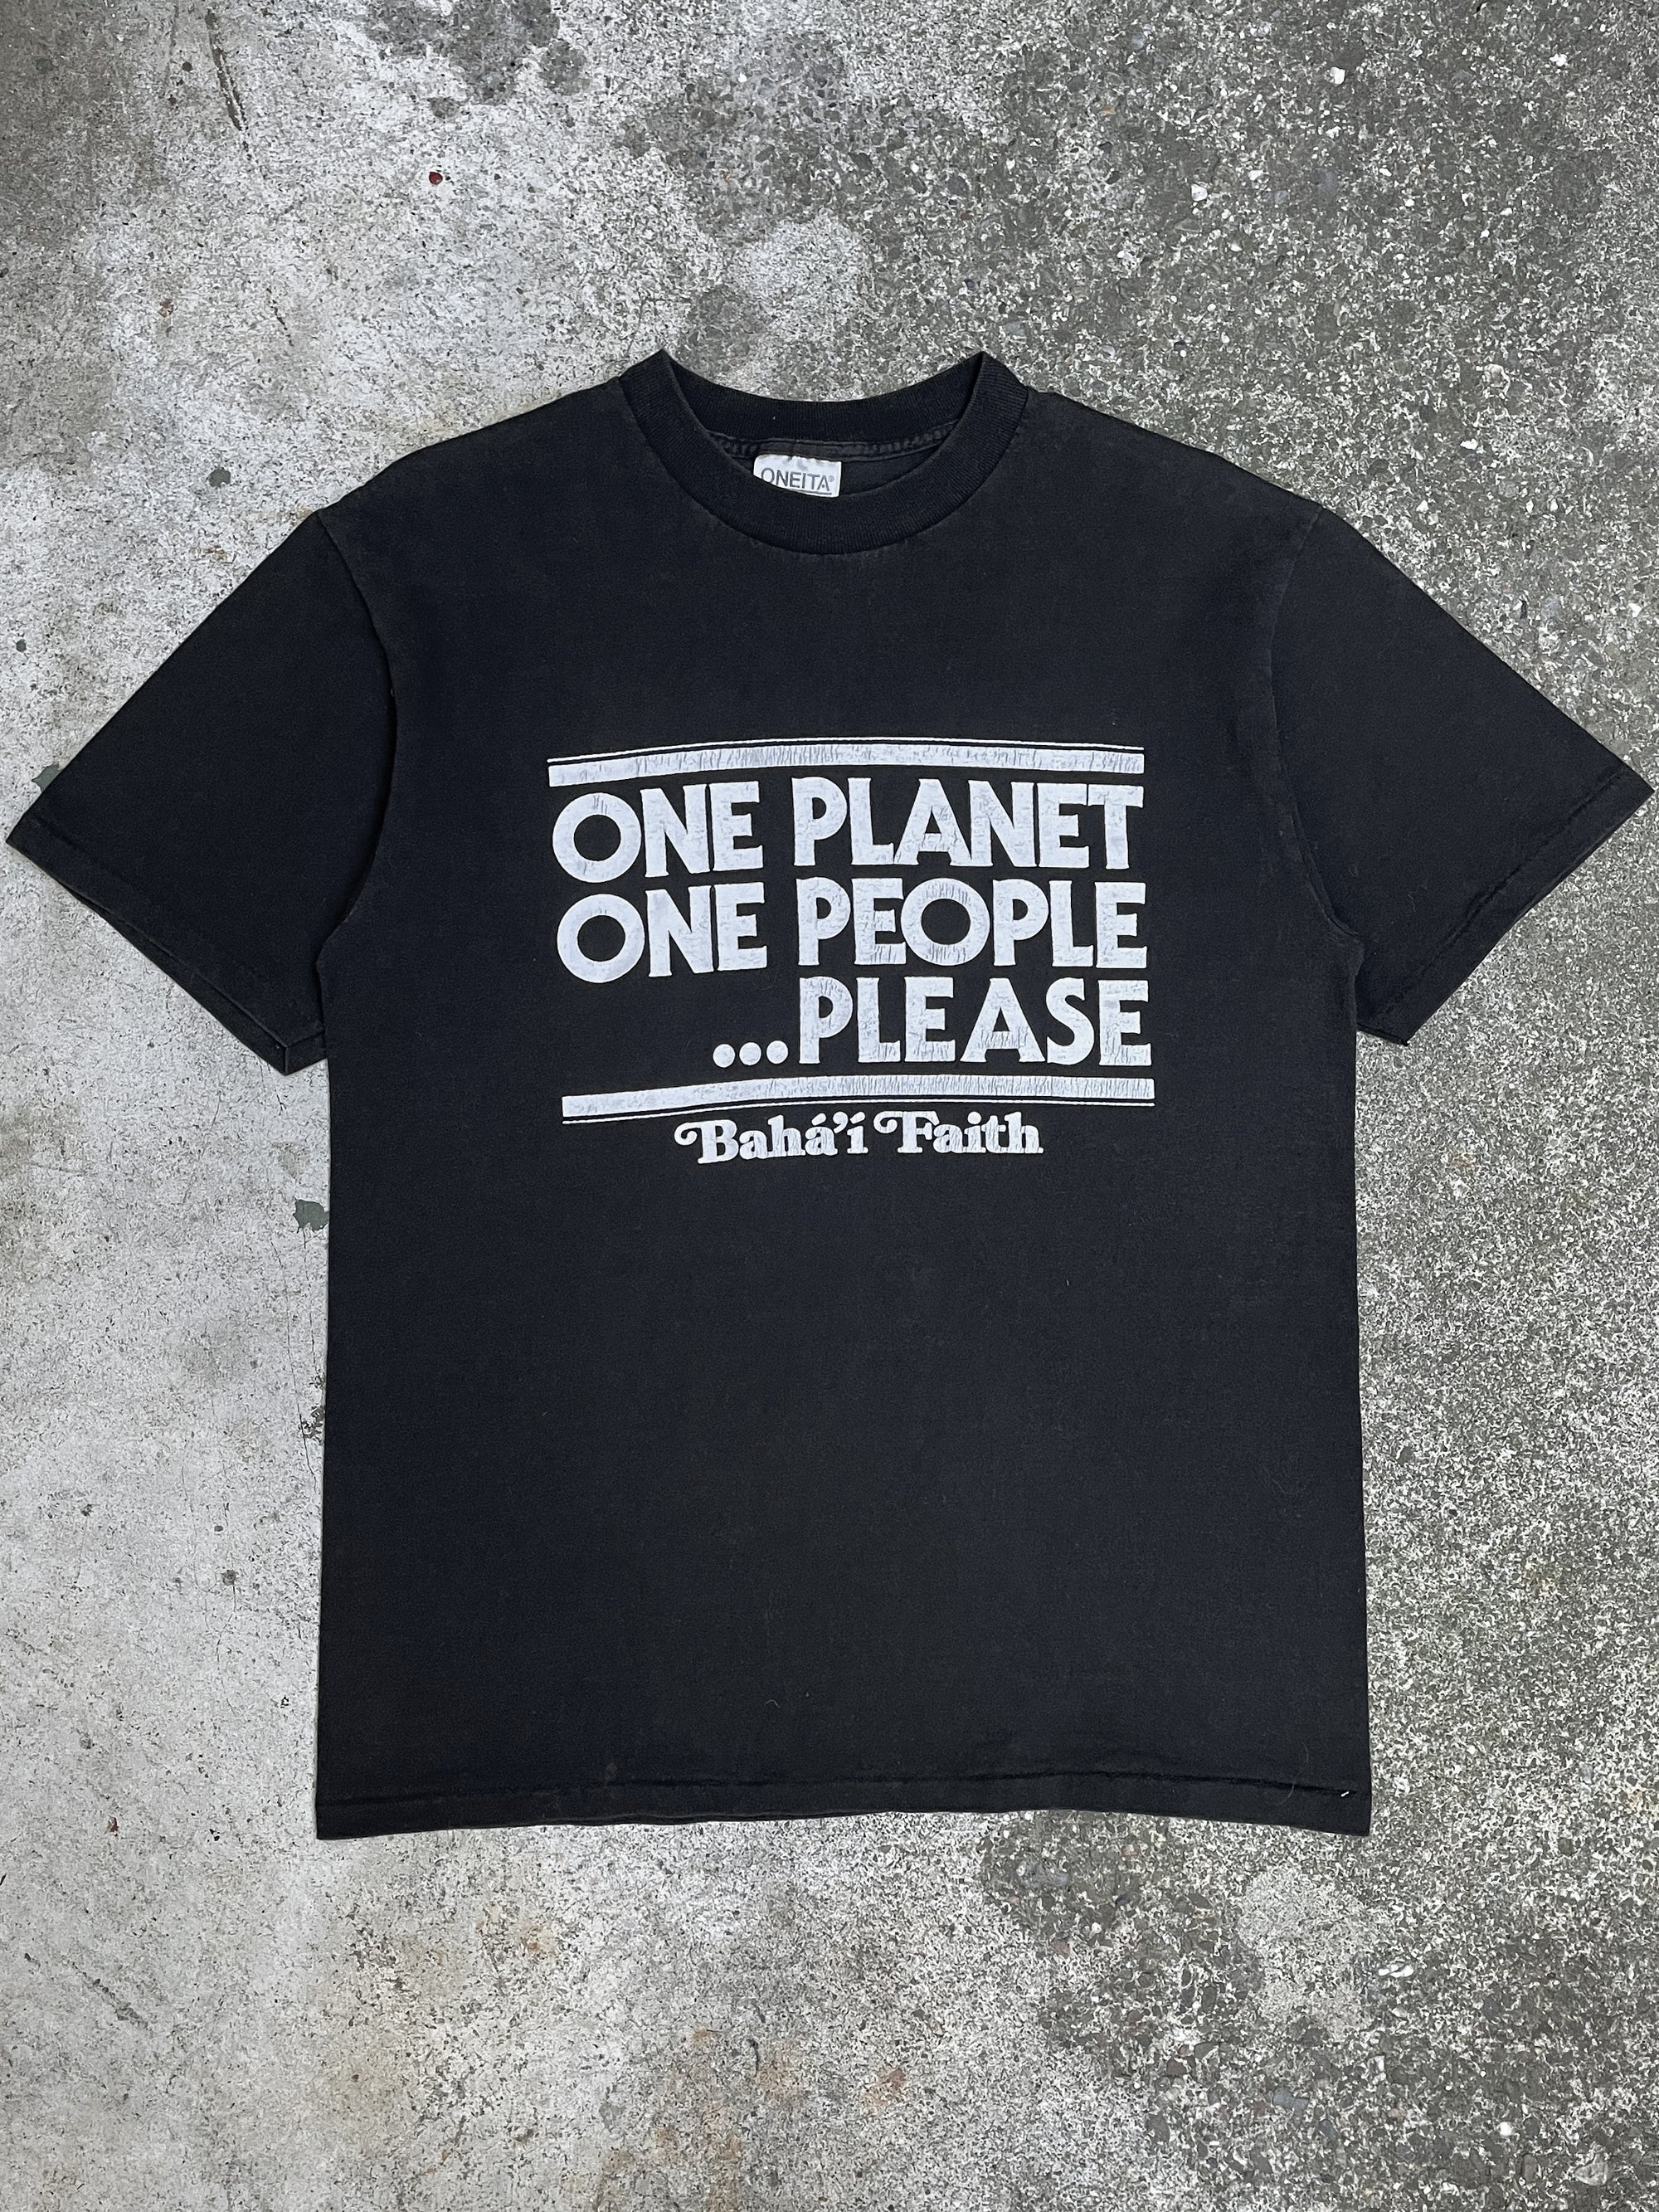 1990s “One Planet One People” Tee (M)